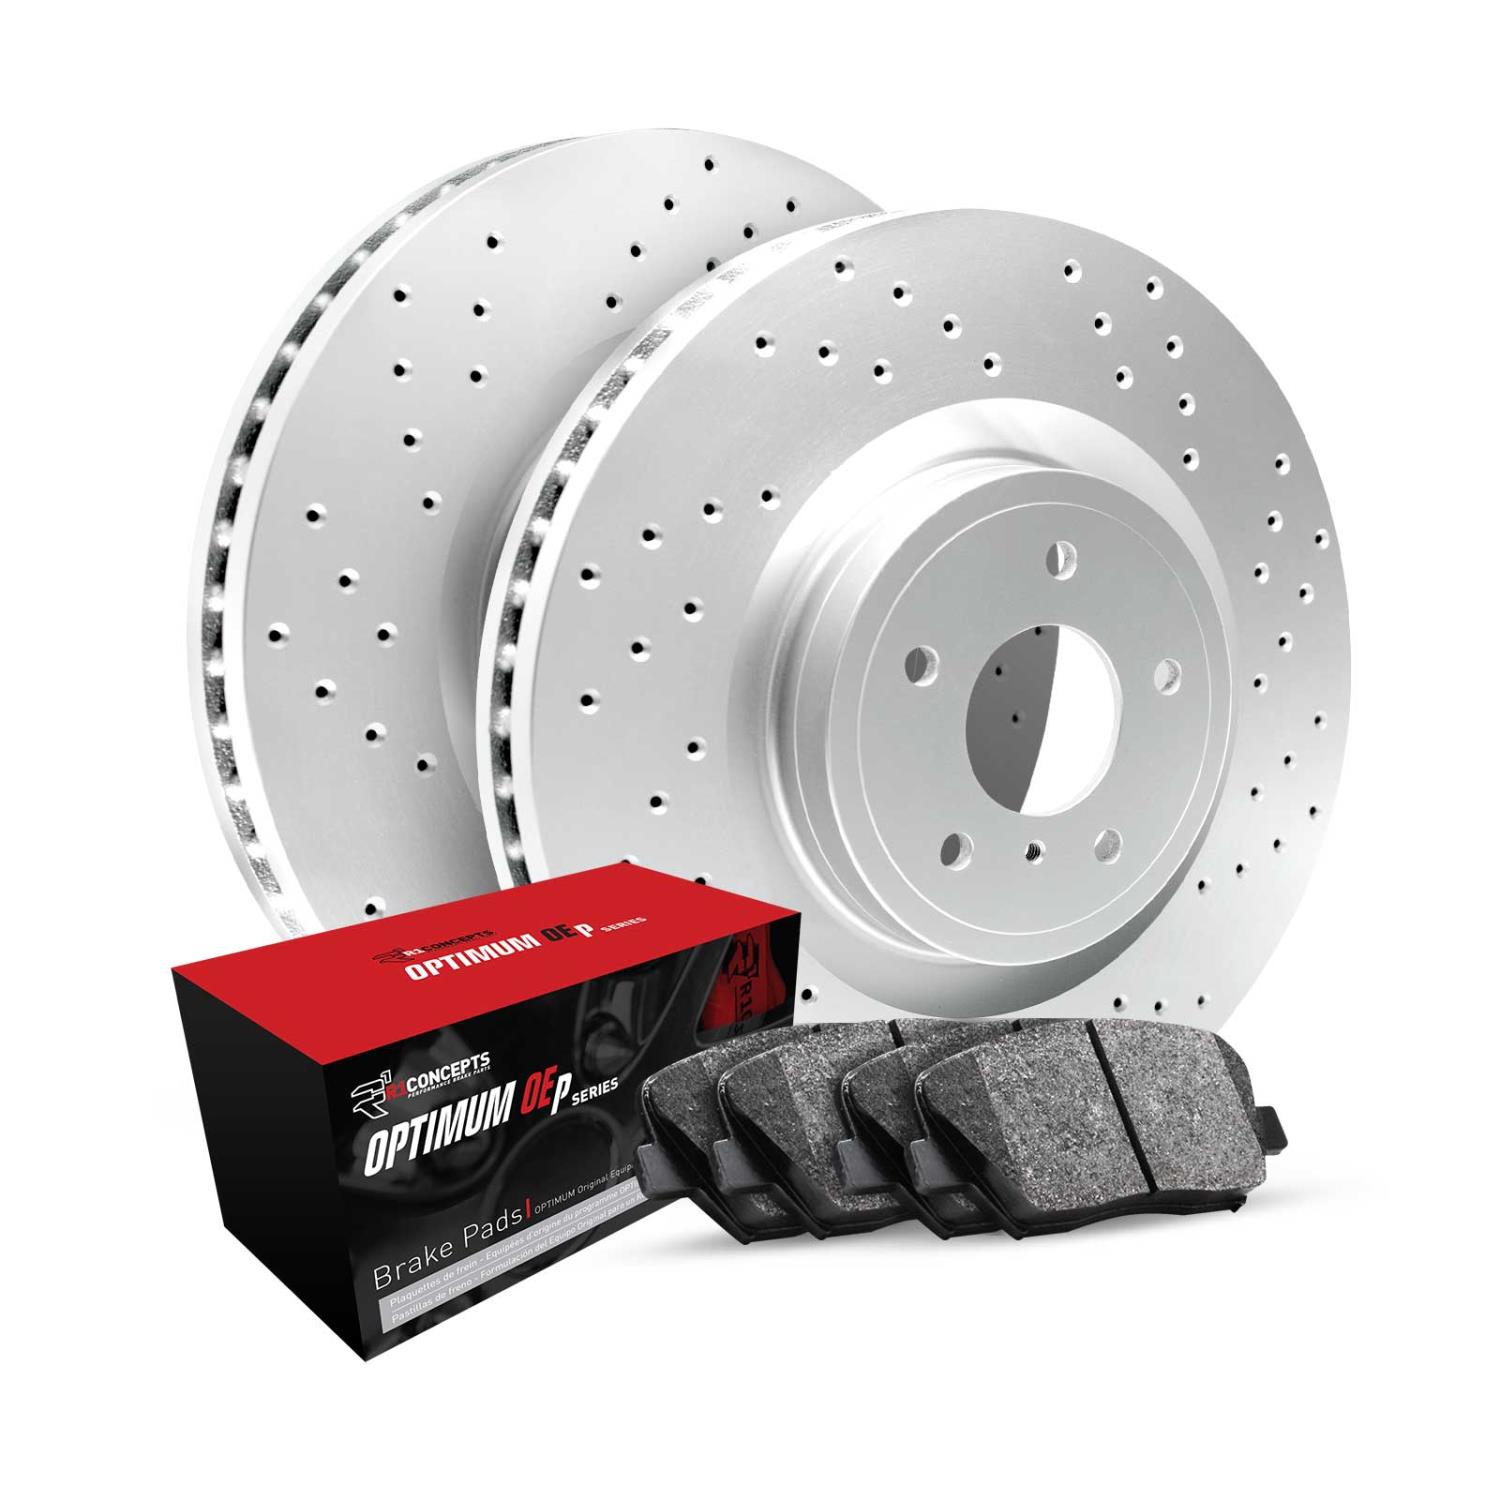 GEO-Carbon Drilled Brake Rotor Set w/Optimum OE Pads, 2009-2016 Fits Multiple Makes/Models, Position: Front